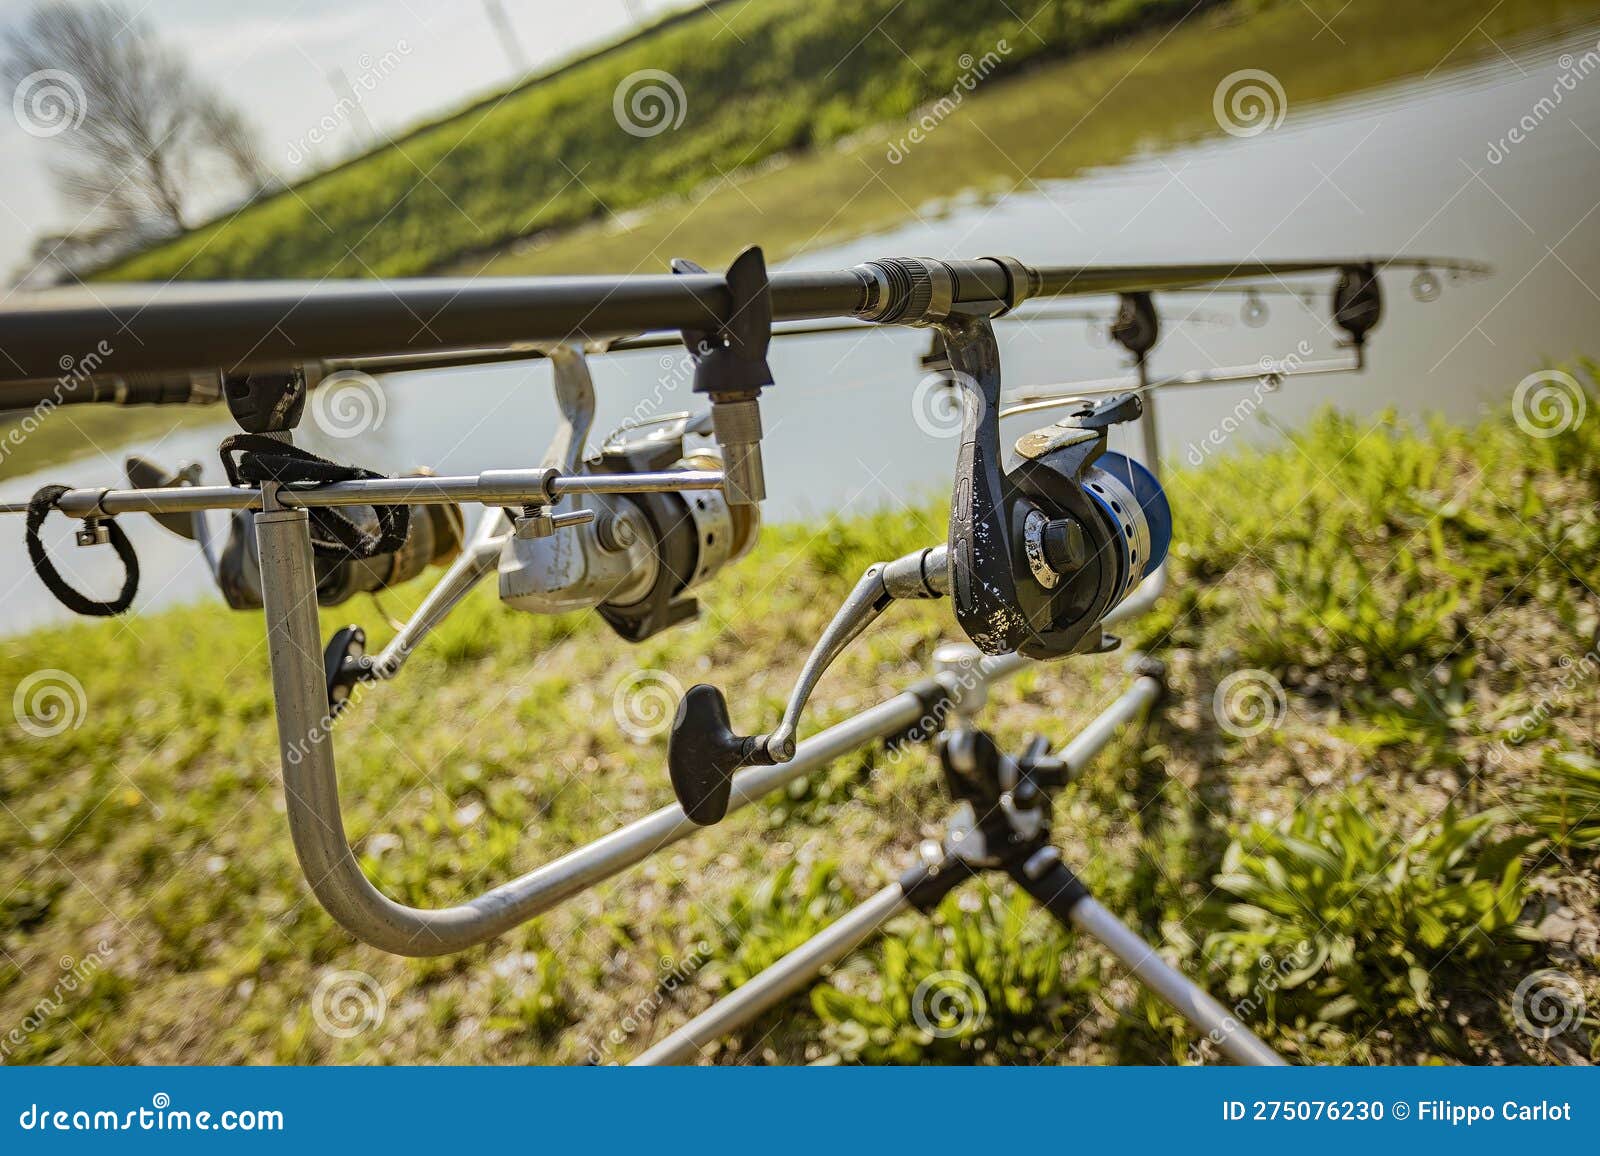 Carp Fishing Equipment on the Bank of a River Stock Photo - Image